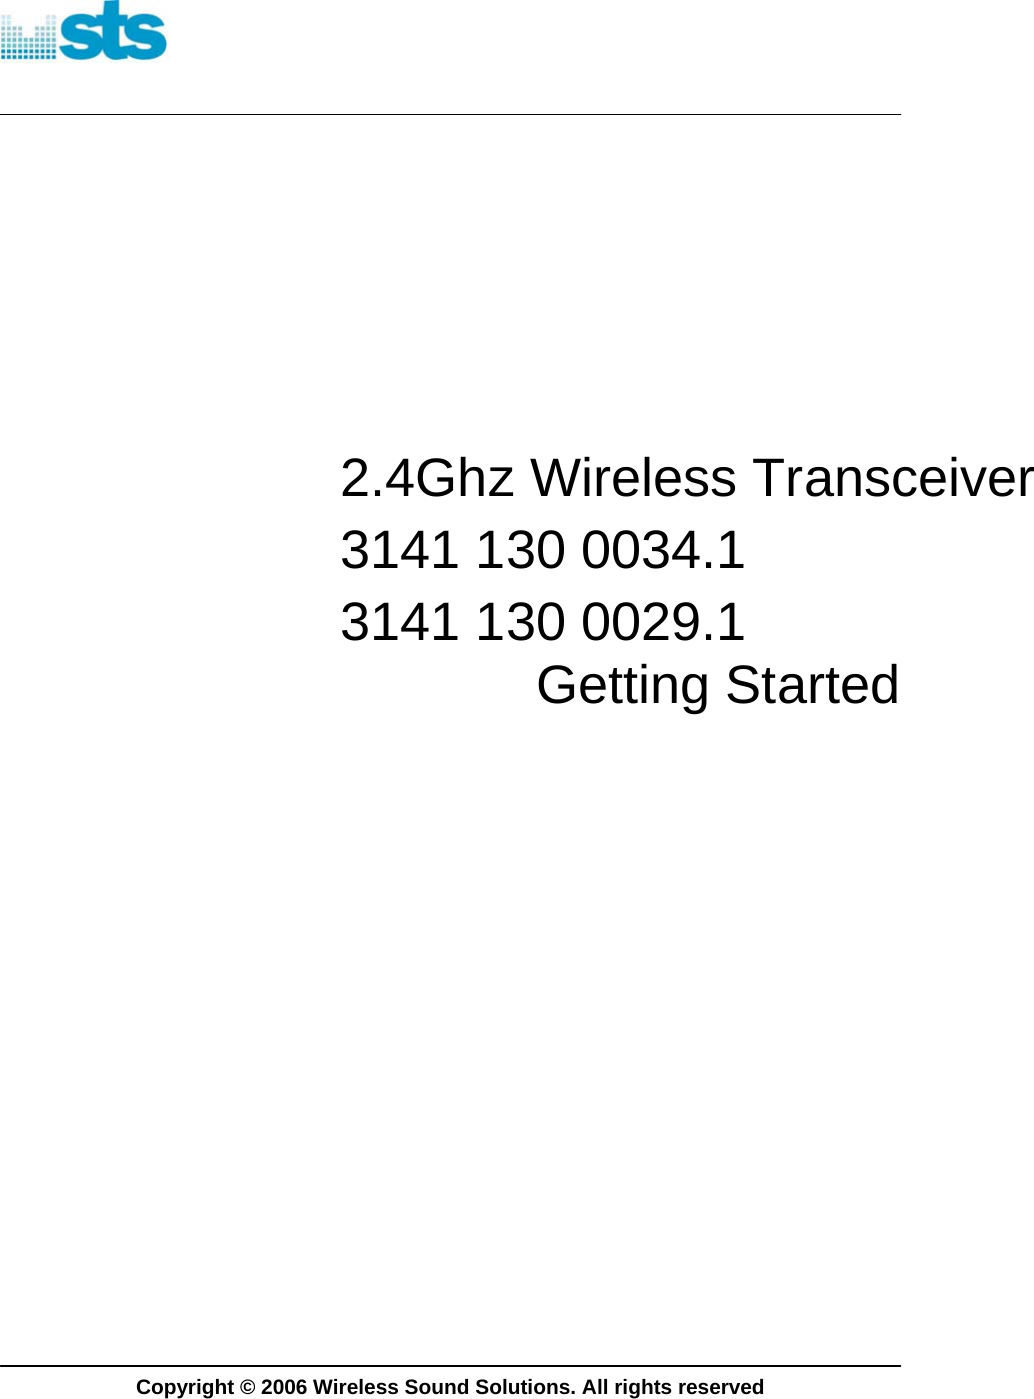              2.4Ghz Wireless Transceiver3141 130 0034.1 3141 130 0029.1 Getting Started                          Copyright © 2006 Wireless Sound Solutions. All rights reserved 